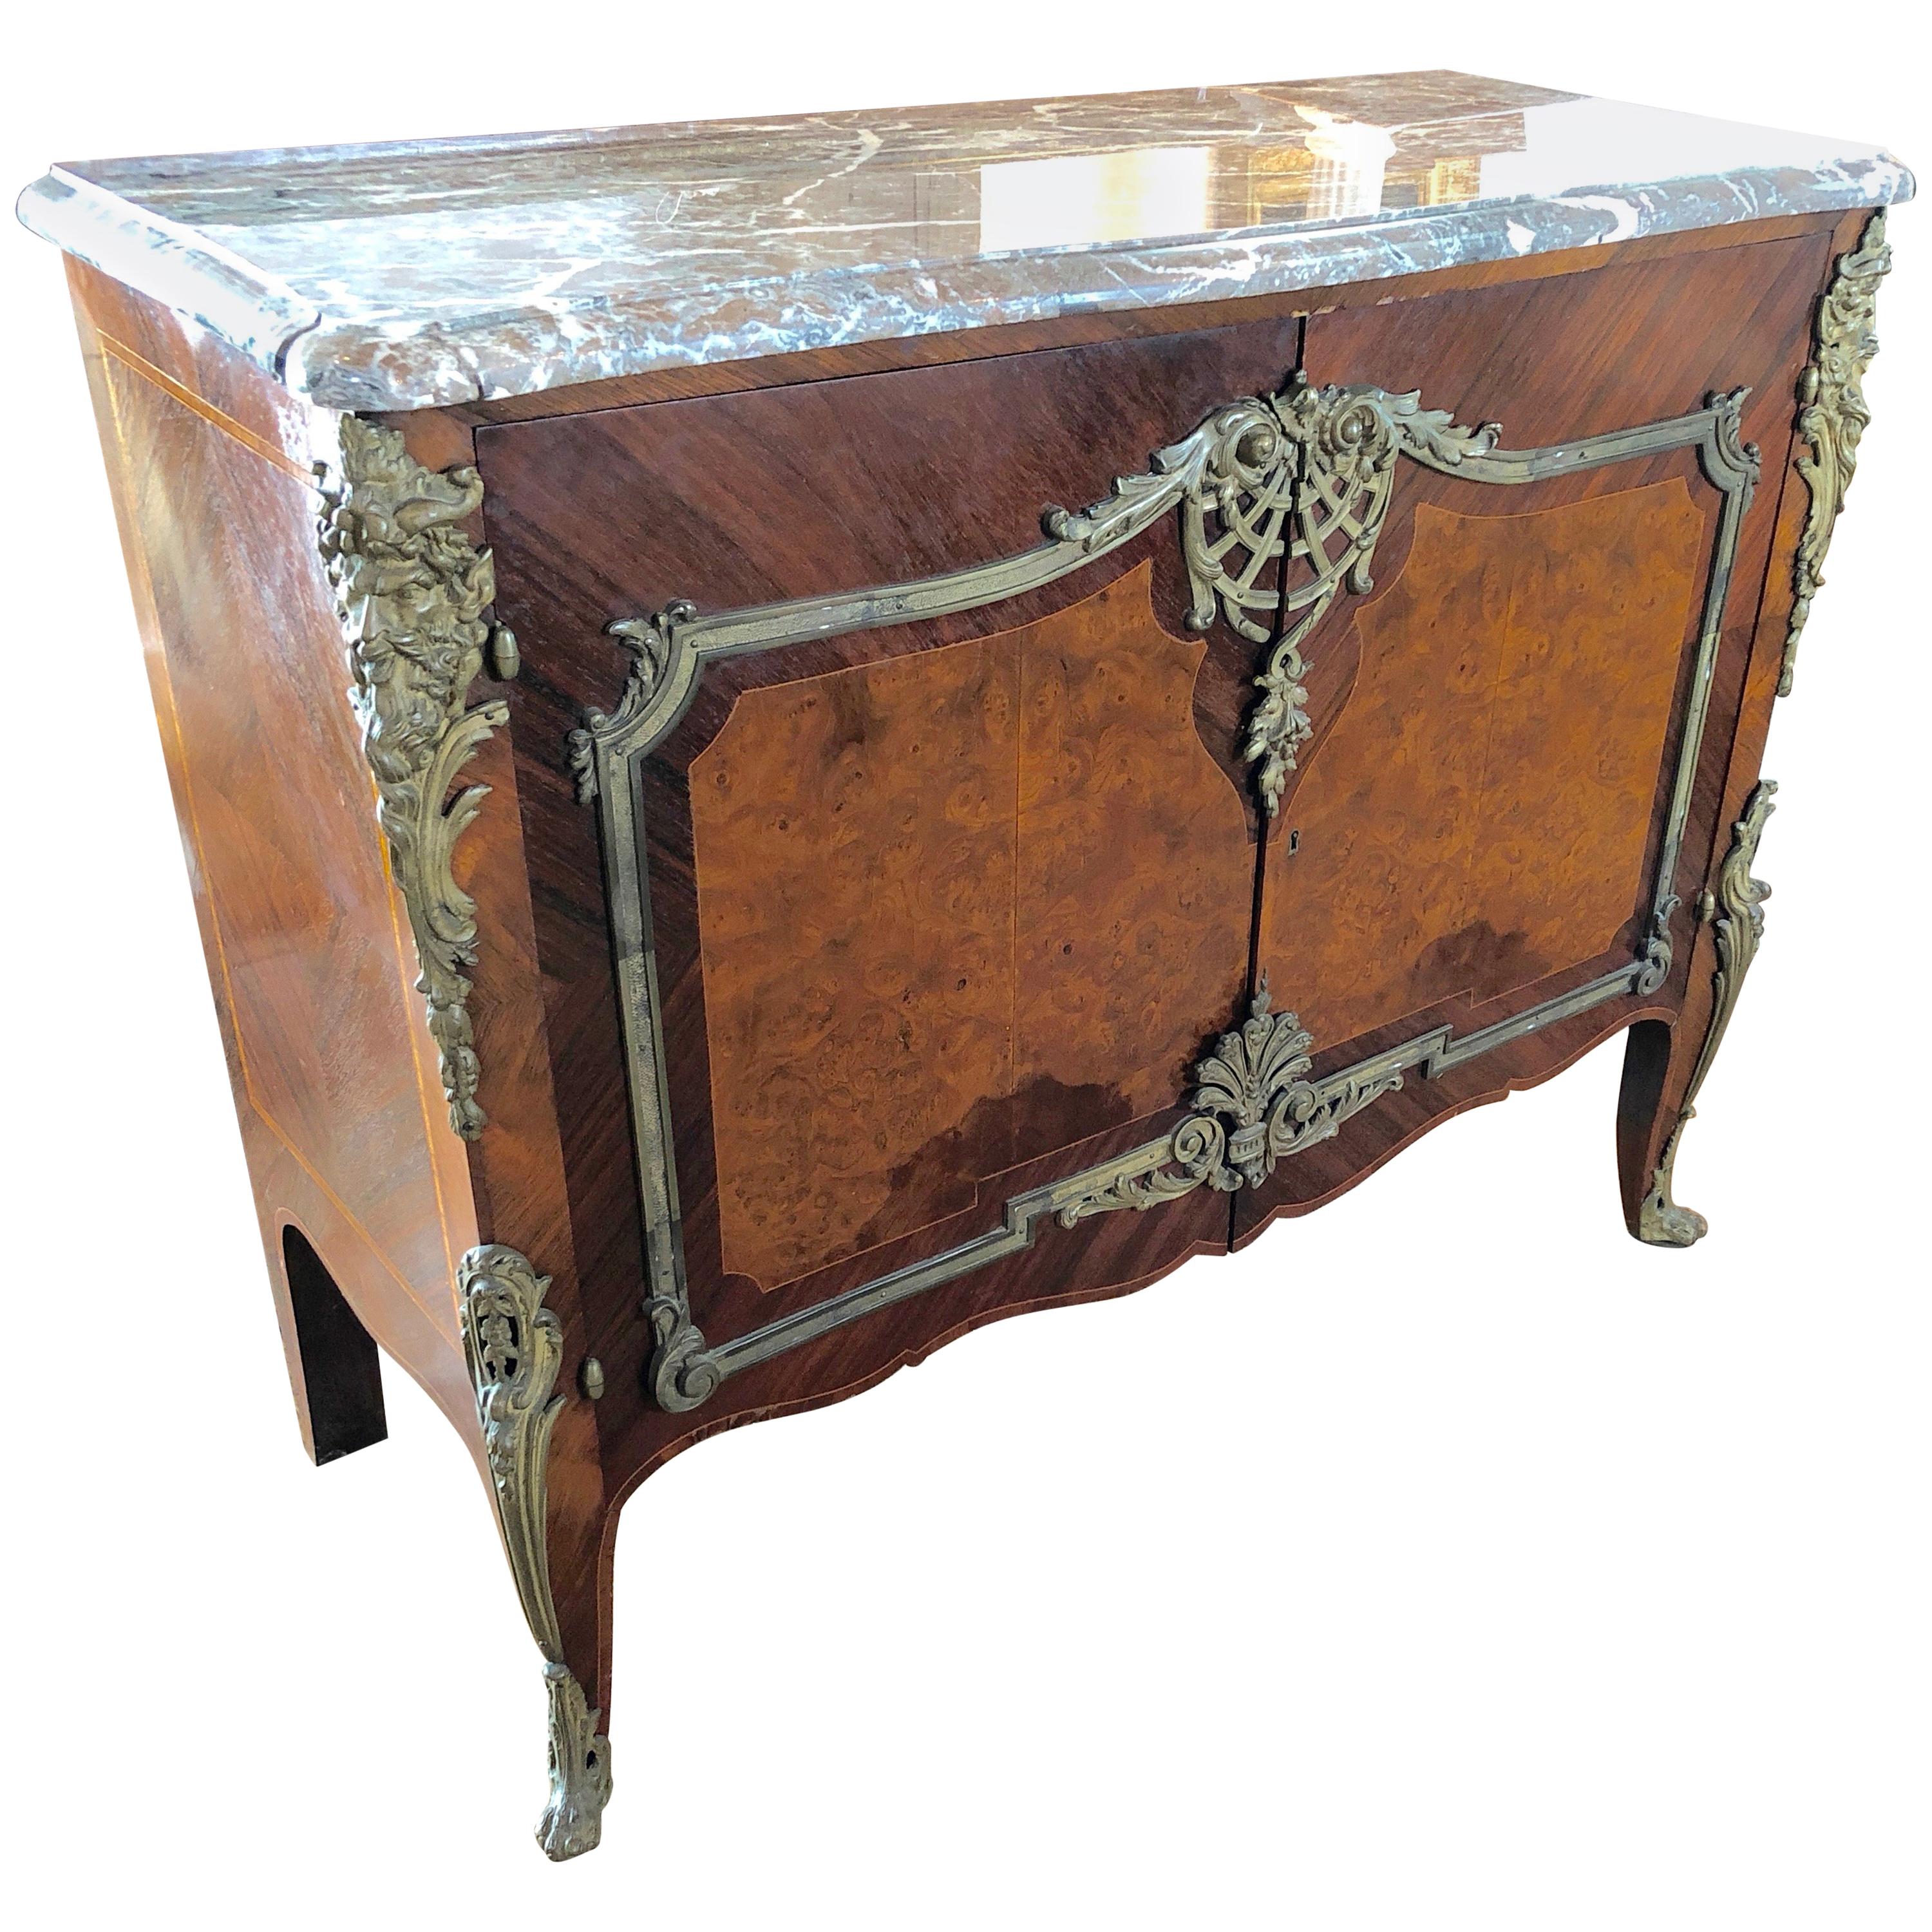 Magnificent Mahogany and Marble Credenza with Gorgeous Bronze Adornments